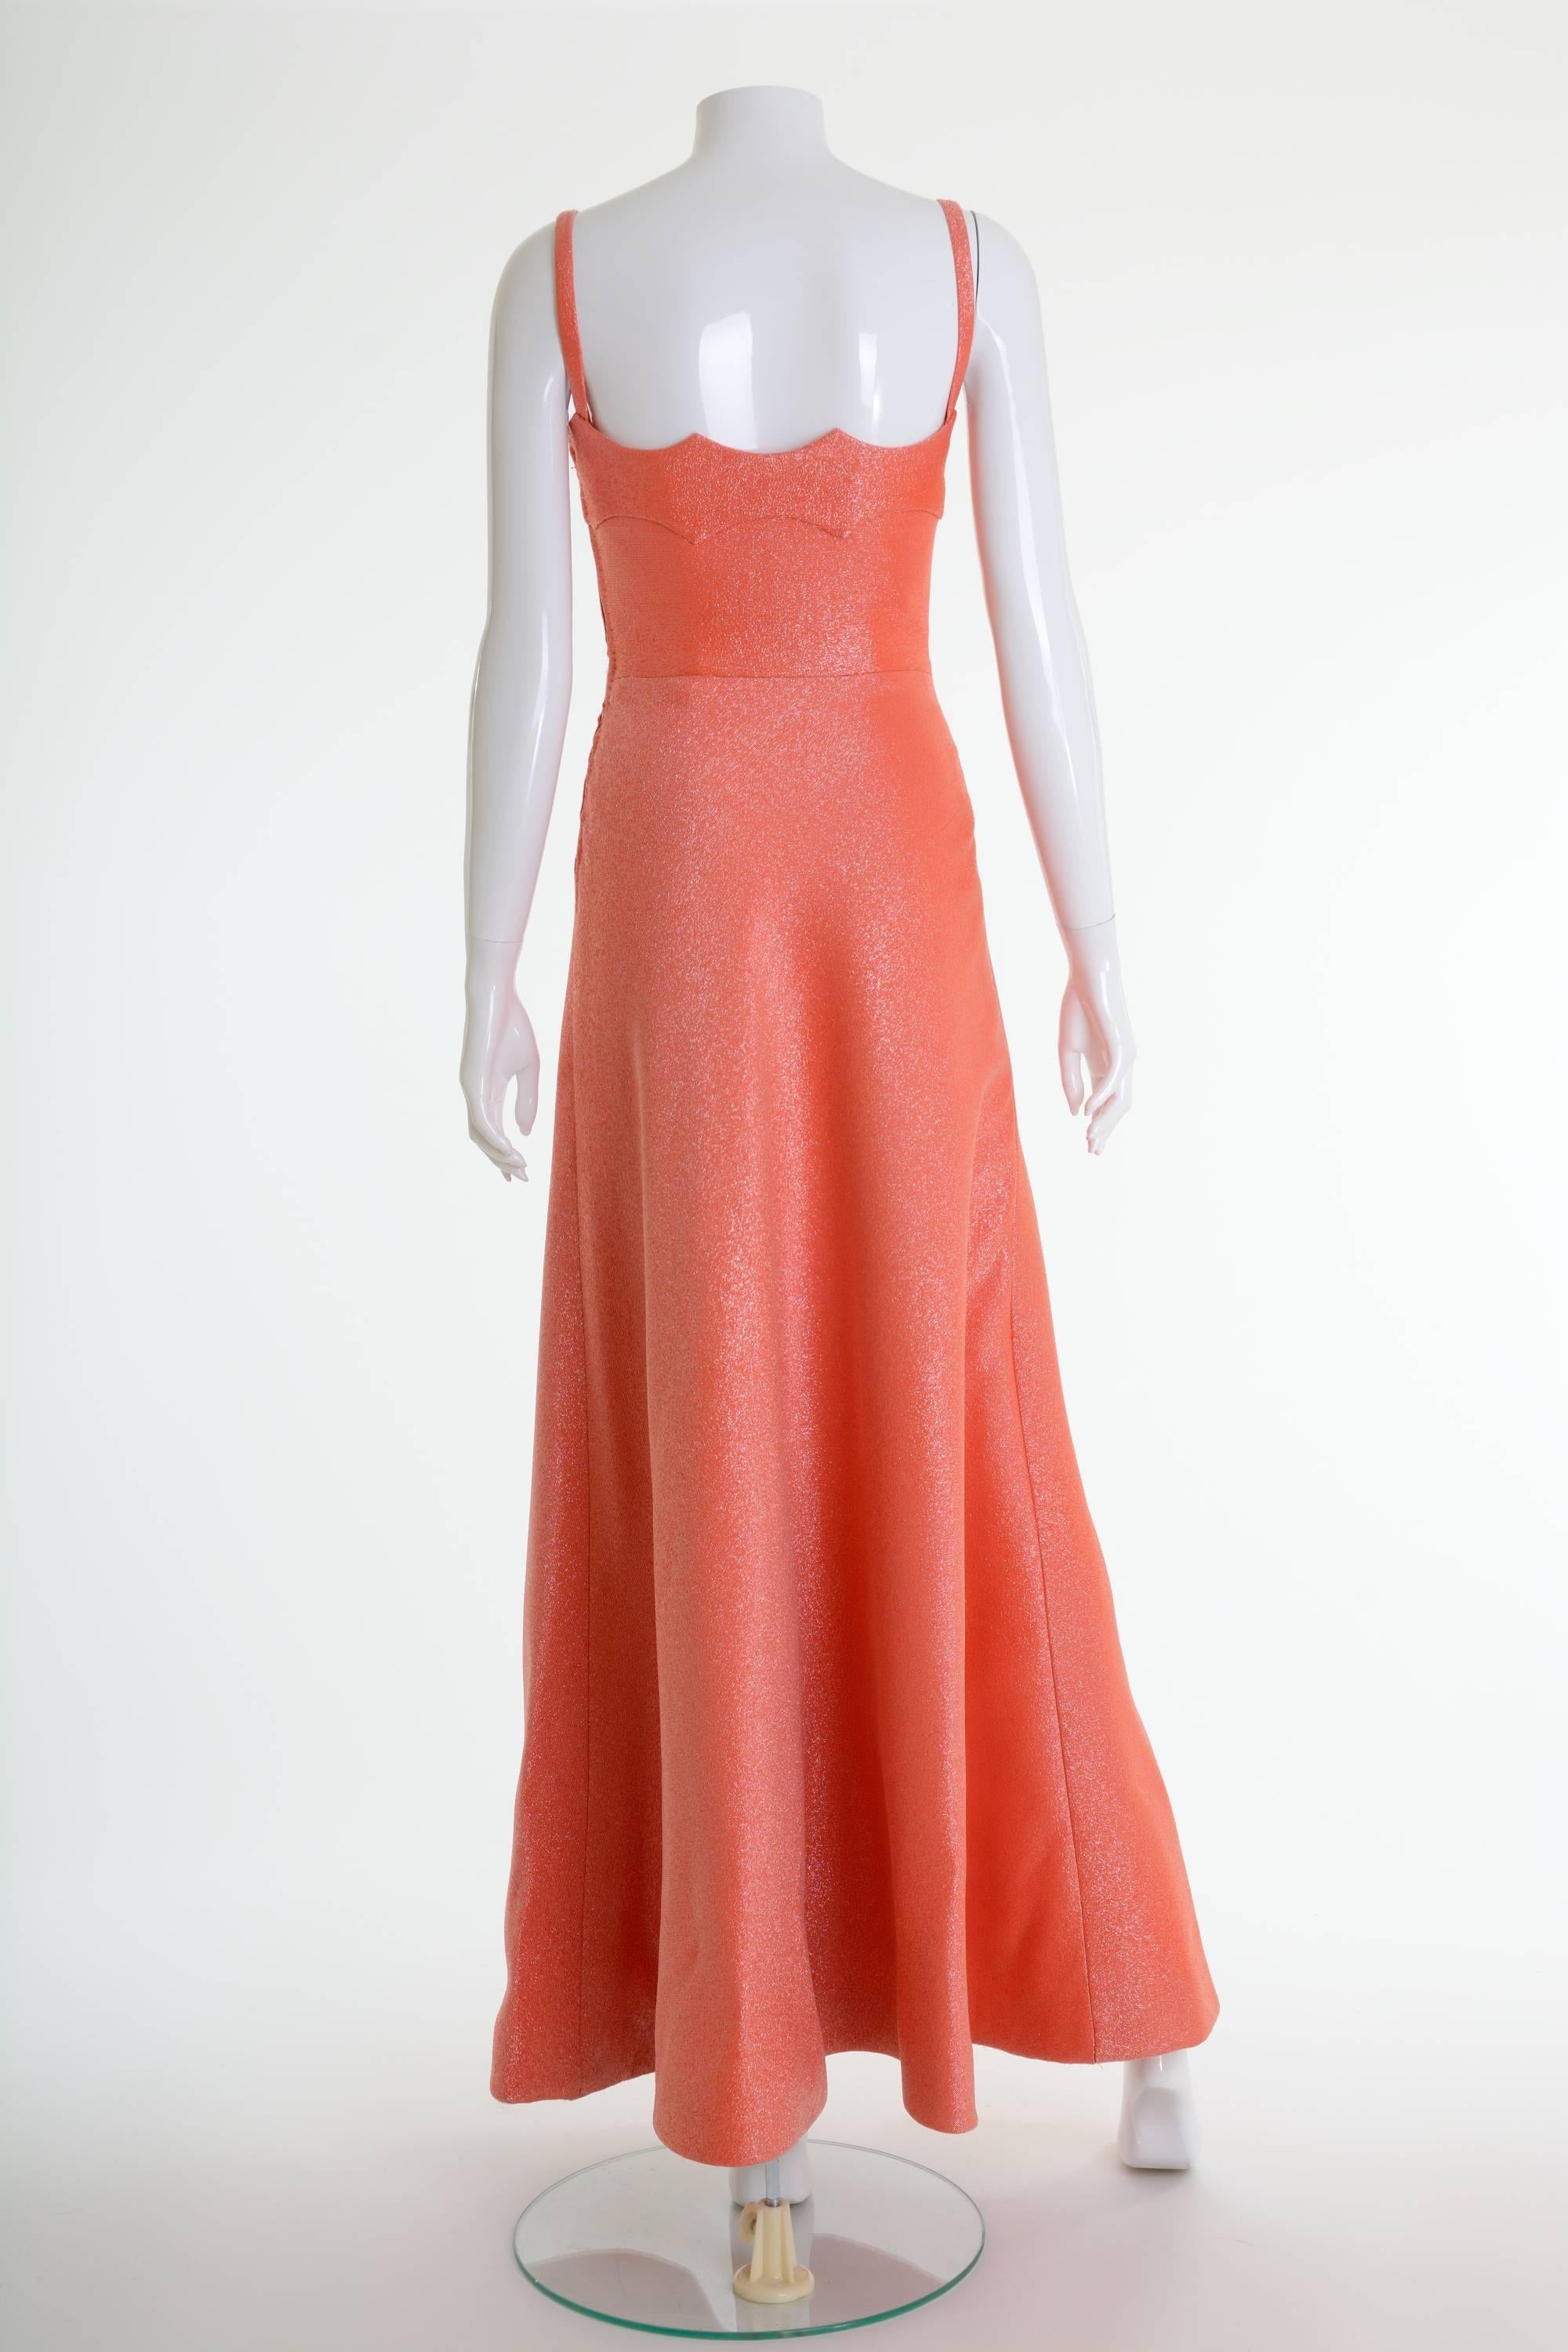 1960s CURIEL Italian Couture Orange Lurex Long Evening Dress In Good Condition For Sale In Milan, Italy